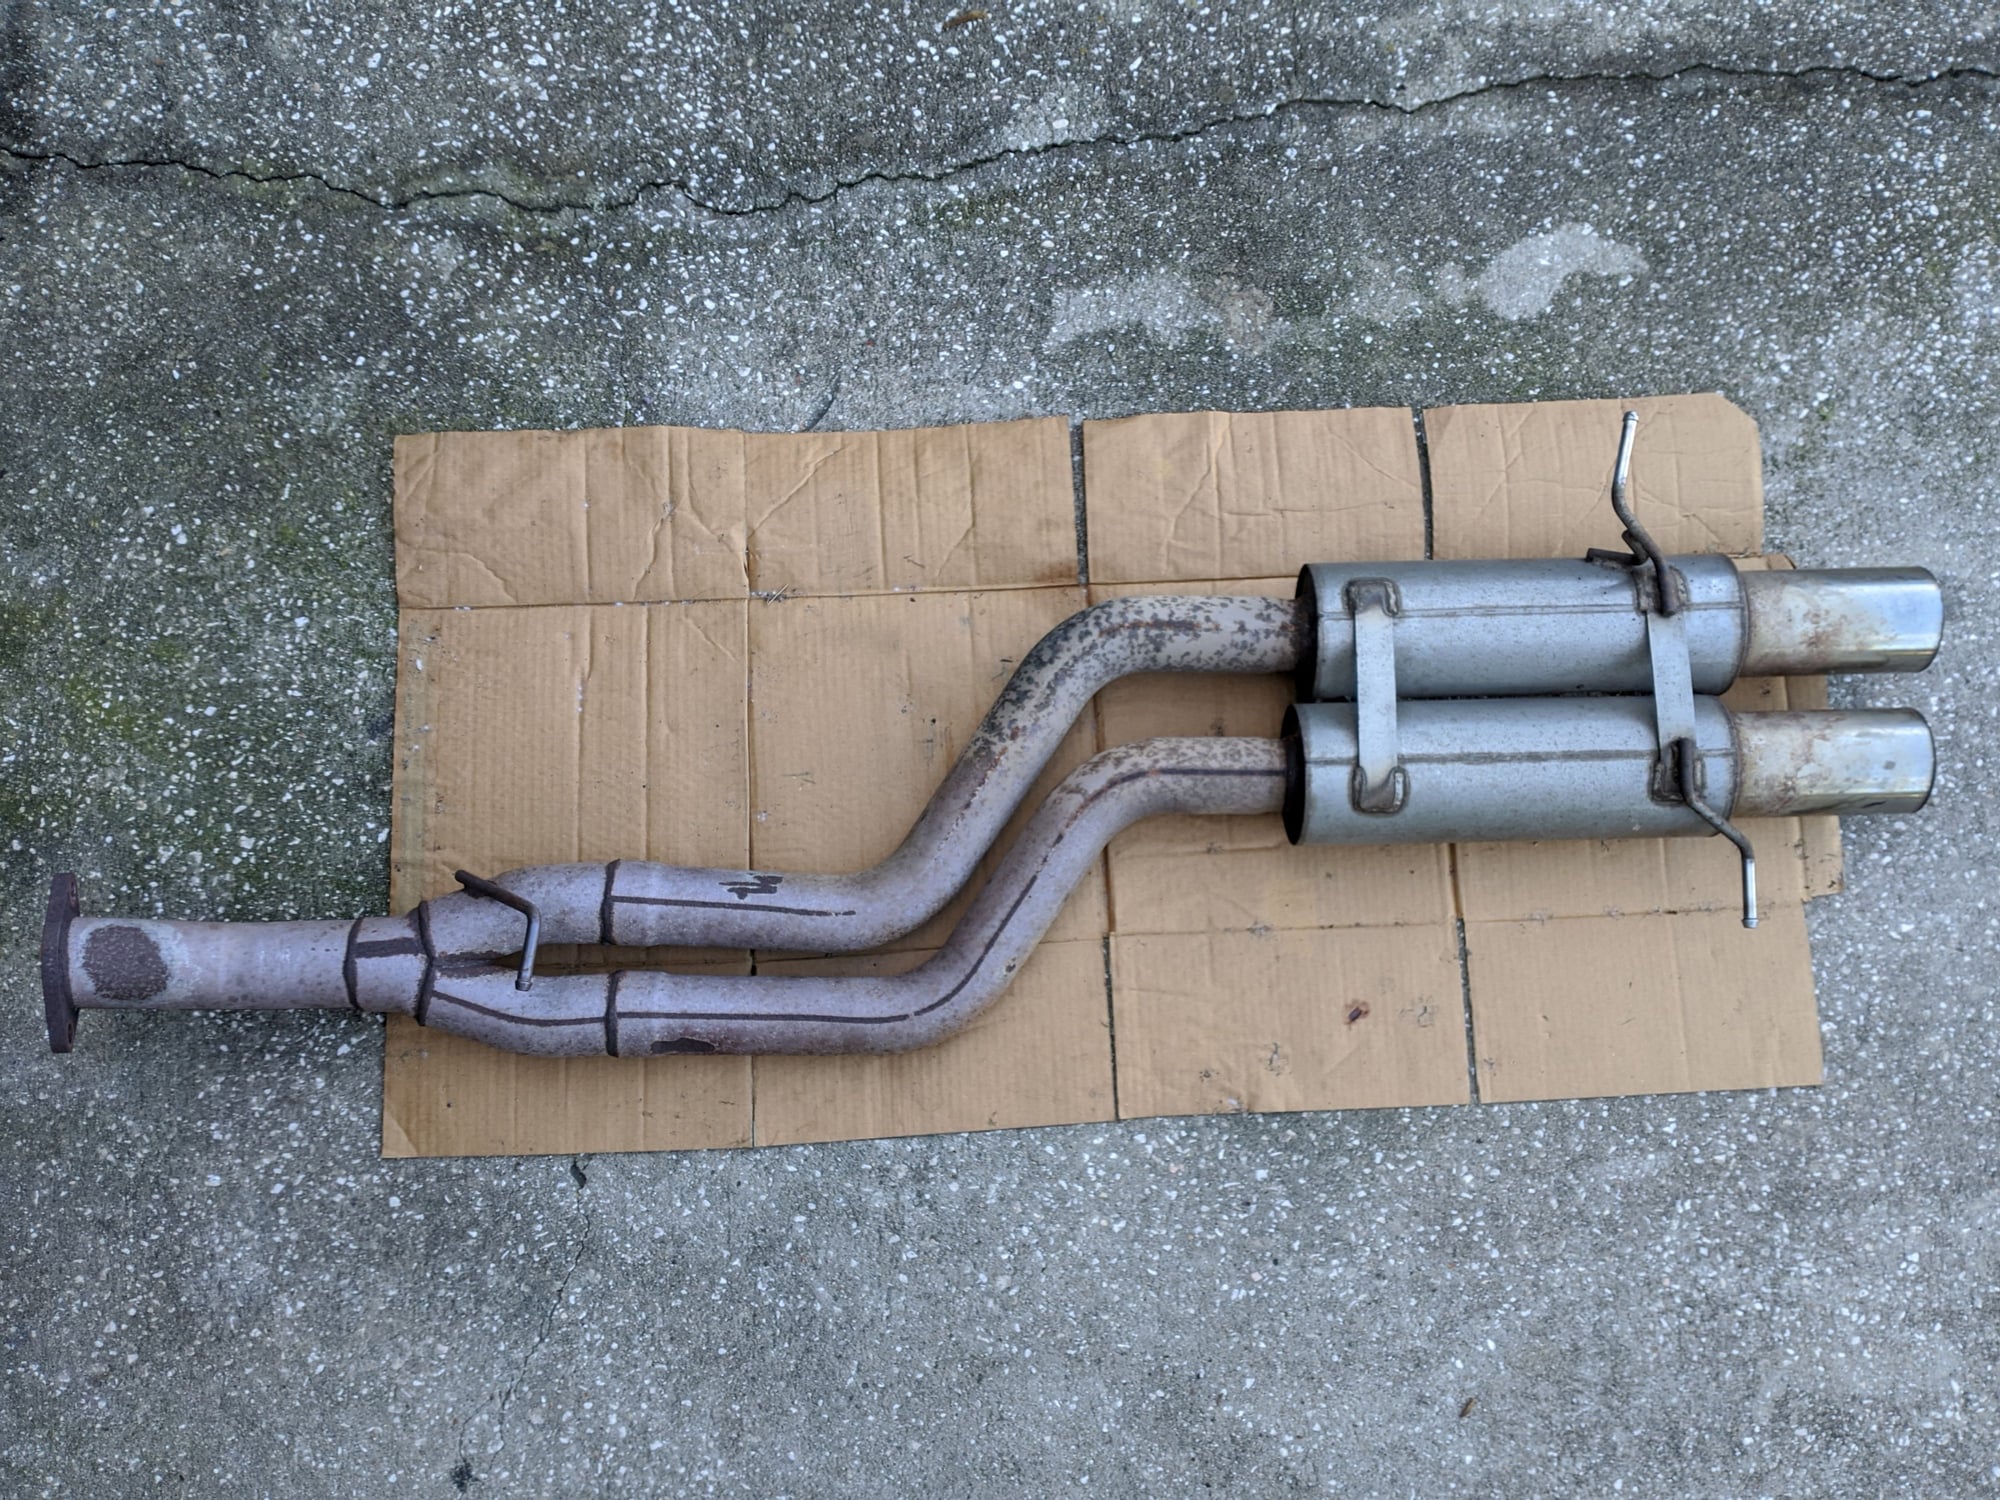 Engine - Exhaust - APEXi N1 Dual Exhaust 163-KZ02 - Used - 1993 to 2002 Mazda RX-7 - Jacksonville, FL 32246, United States